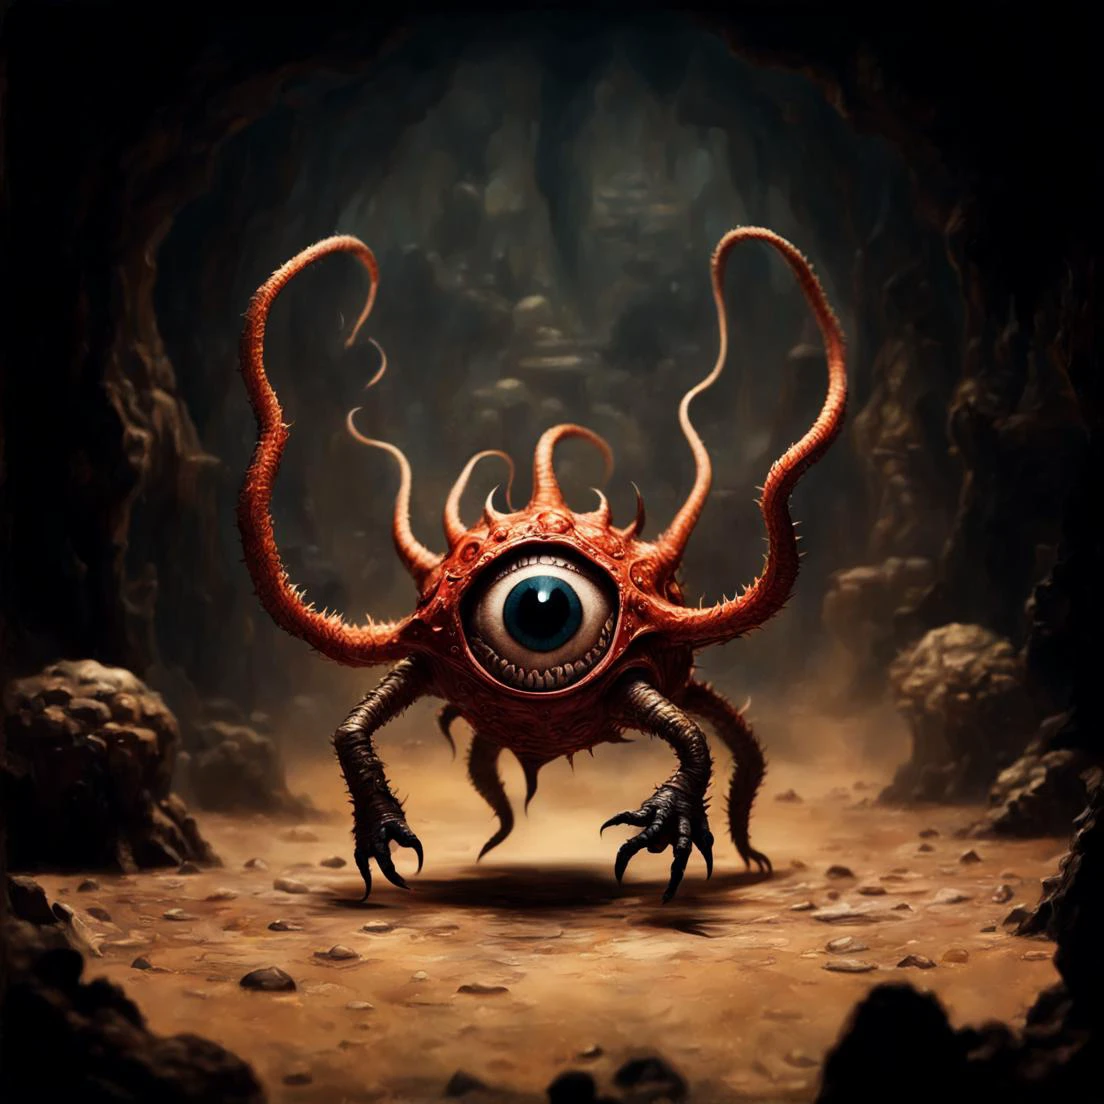 Floating round (((one eyed))) D&D BEHOLDER monster, in the spotlight in a cave, surrounded by void magic. with an armoured knight stood facing it